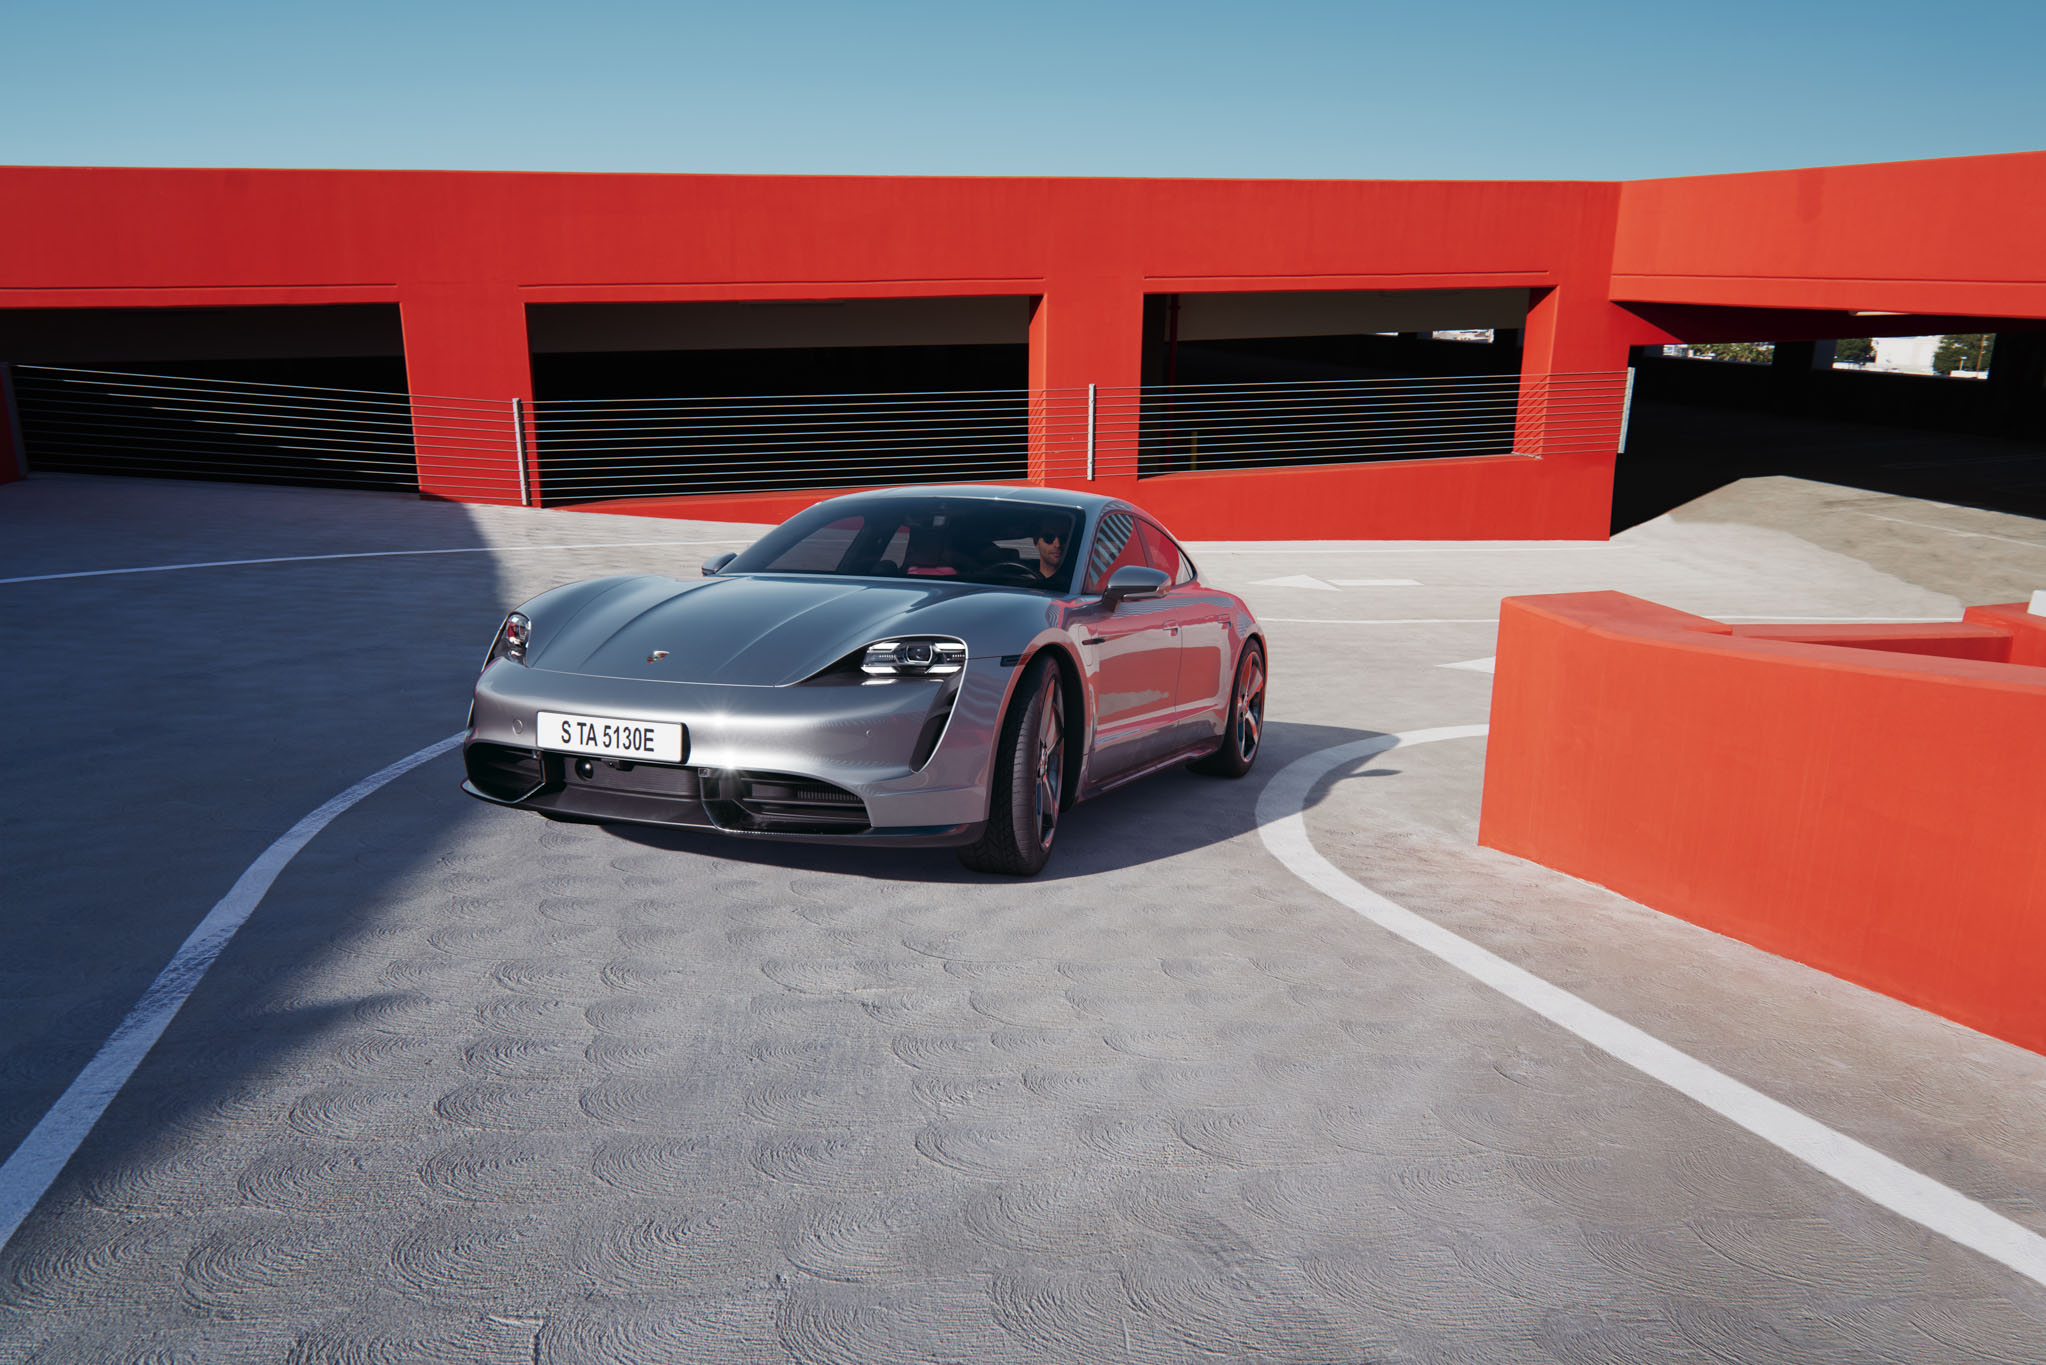 A render of a Porshe Taycan Turbo in a bright red-painted parking garage.